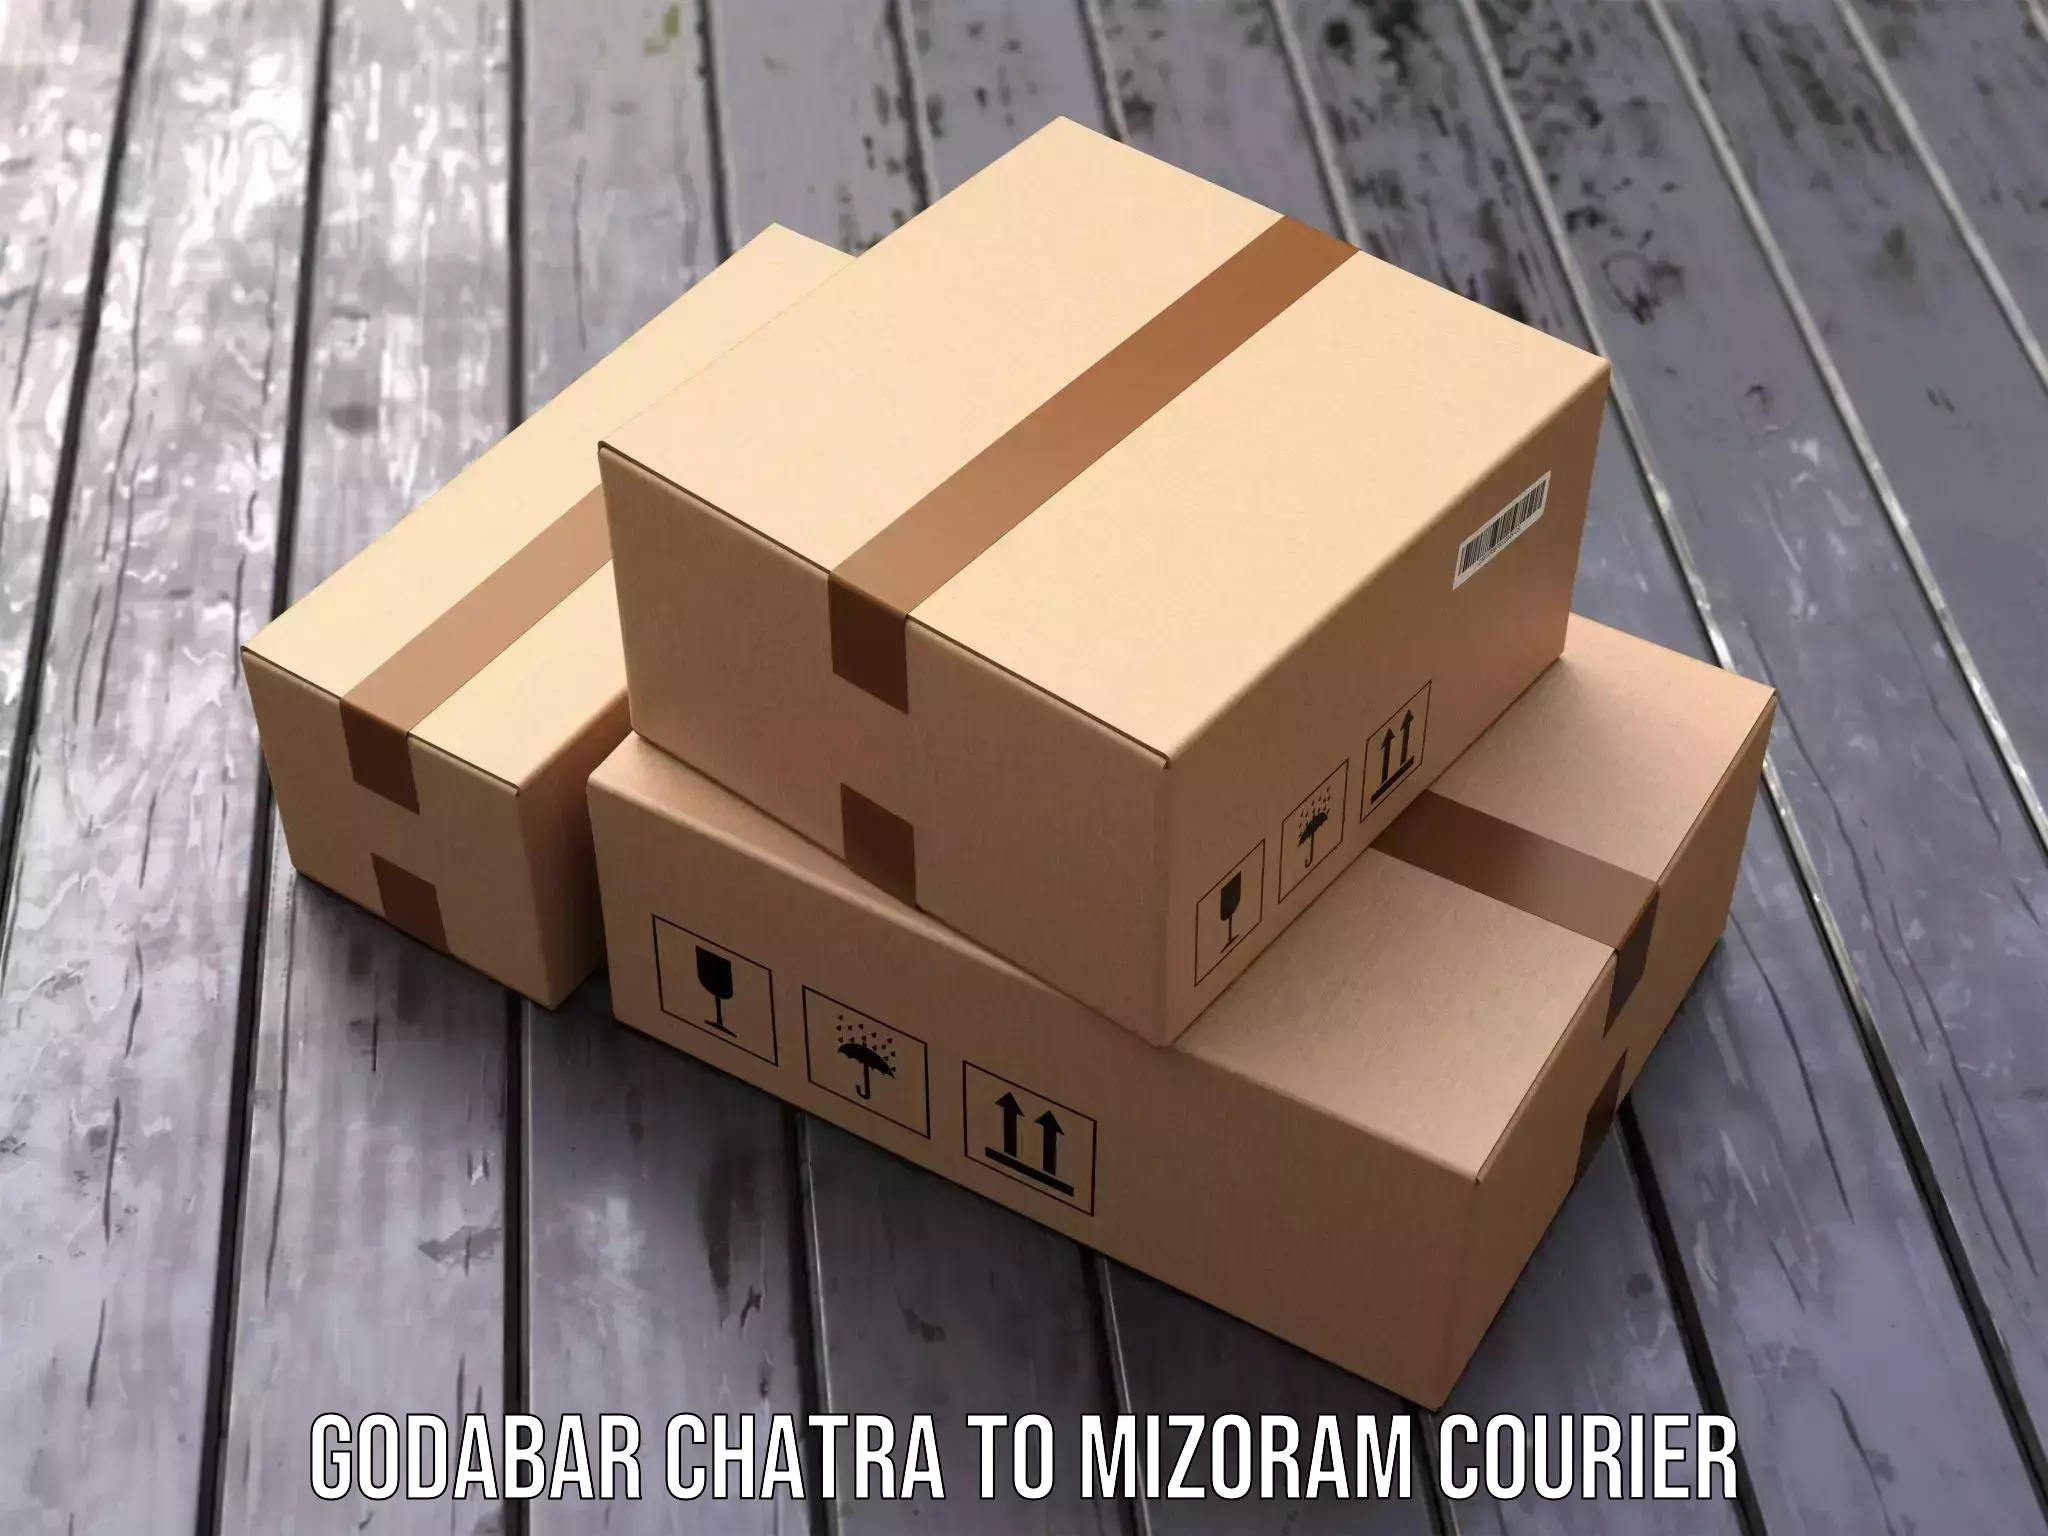 Courier service innovation in Godabar Chatra to Siaha